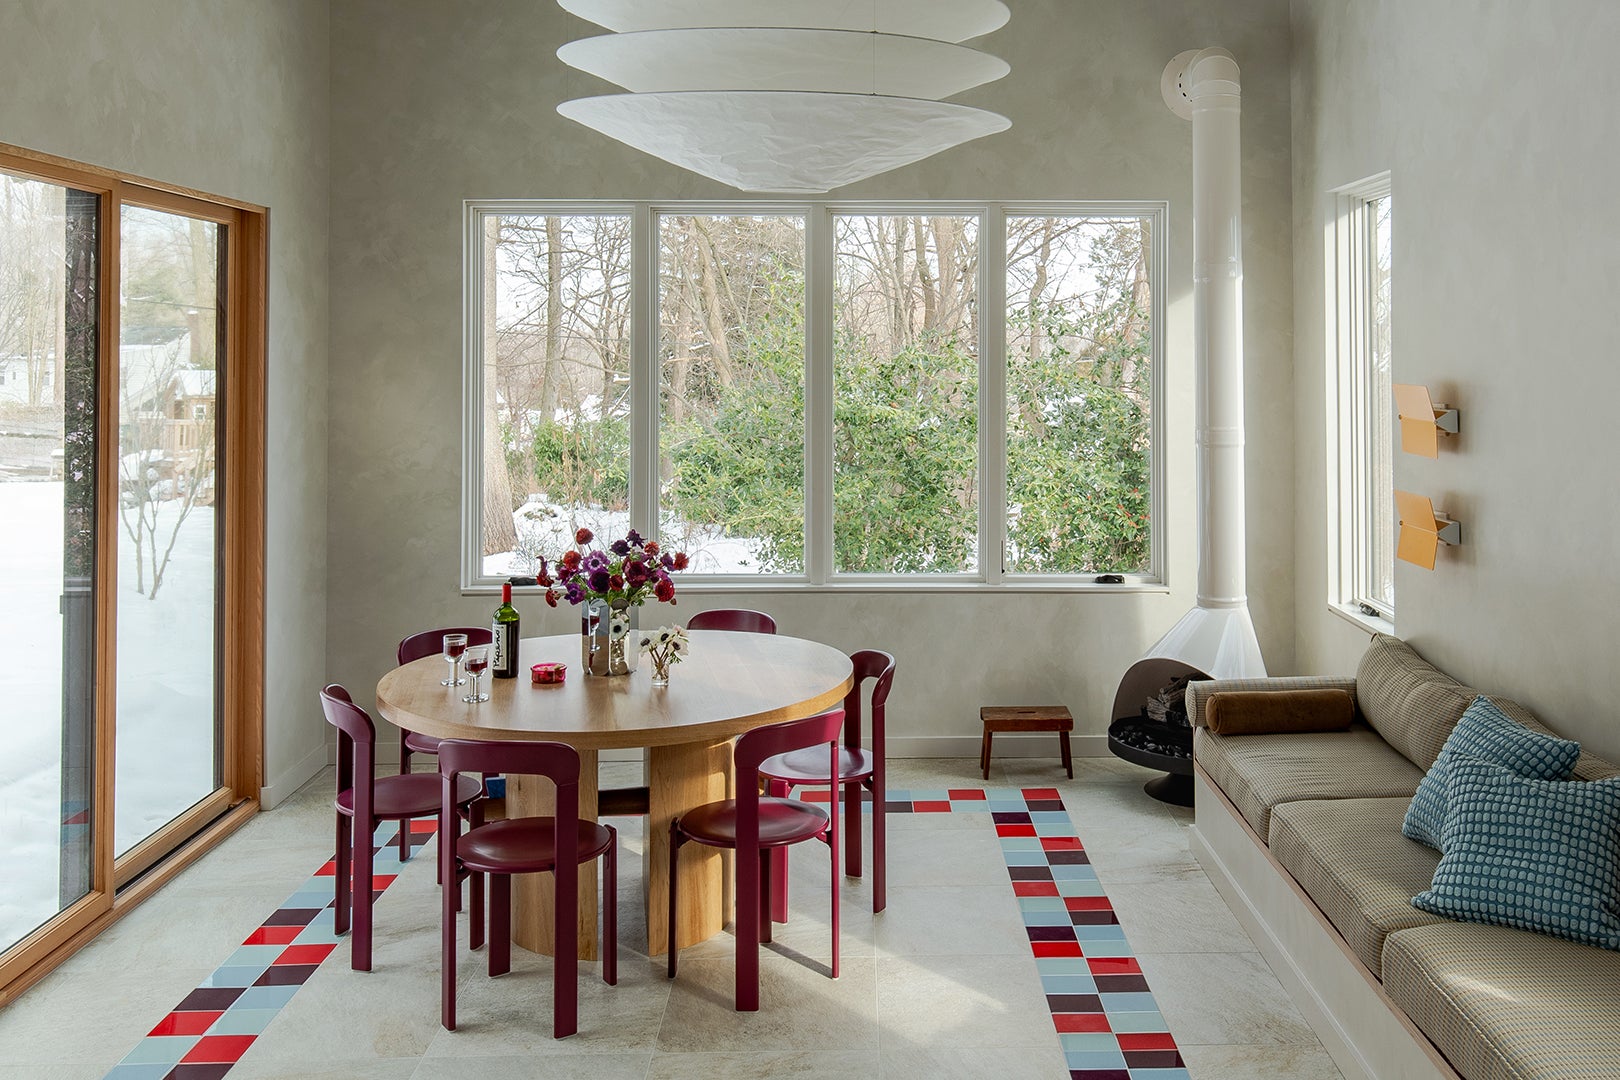 Dining room with checkerboard floor